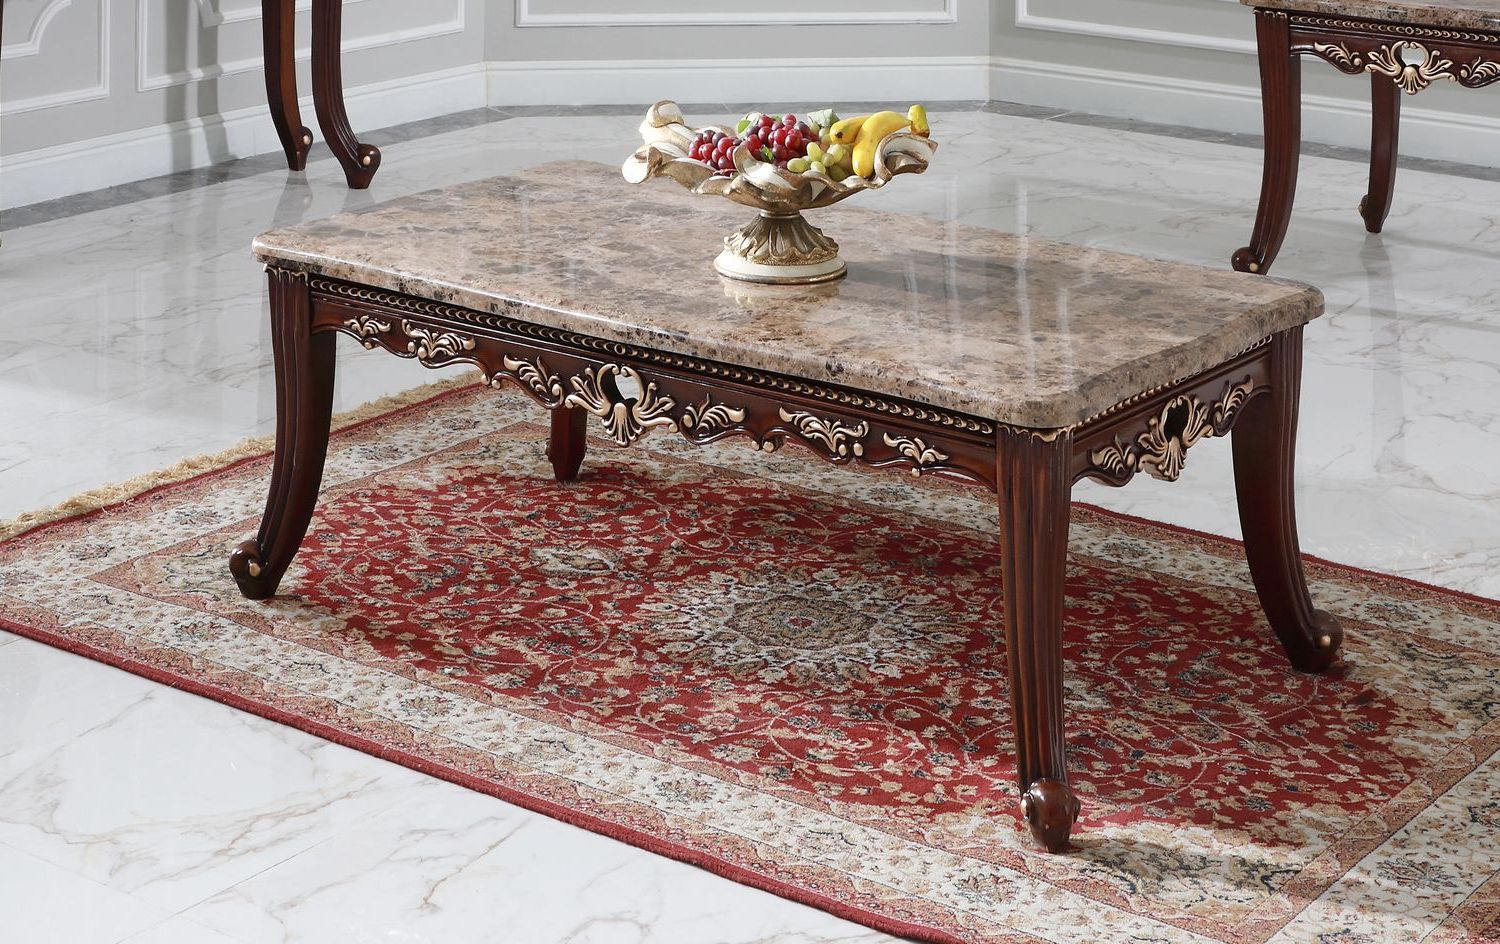 Marble Top Coffee Tables Within Most Popular Azalea Marble Top Traditional Coffee Table In Dark Cherry With Gold Accents (View 6 of 10)